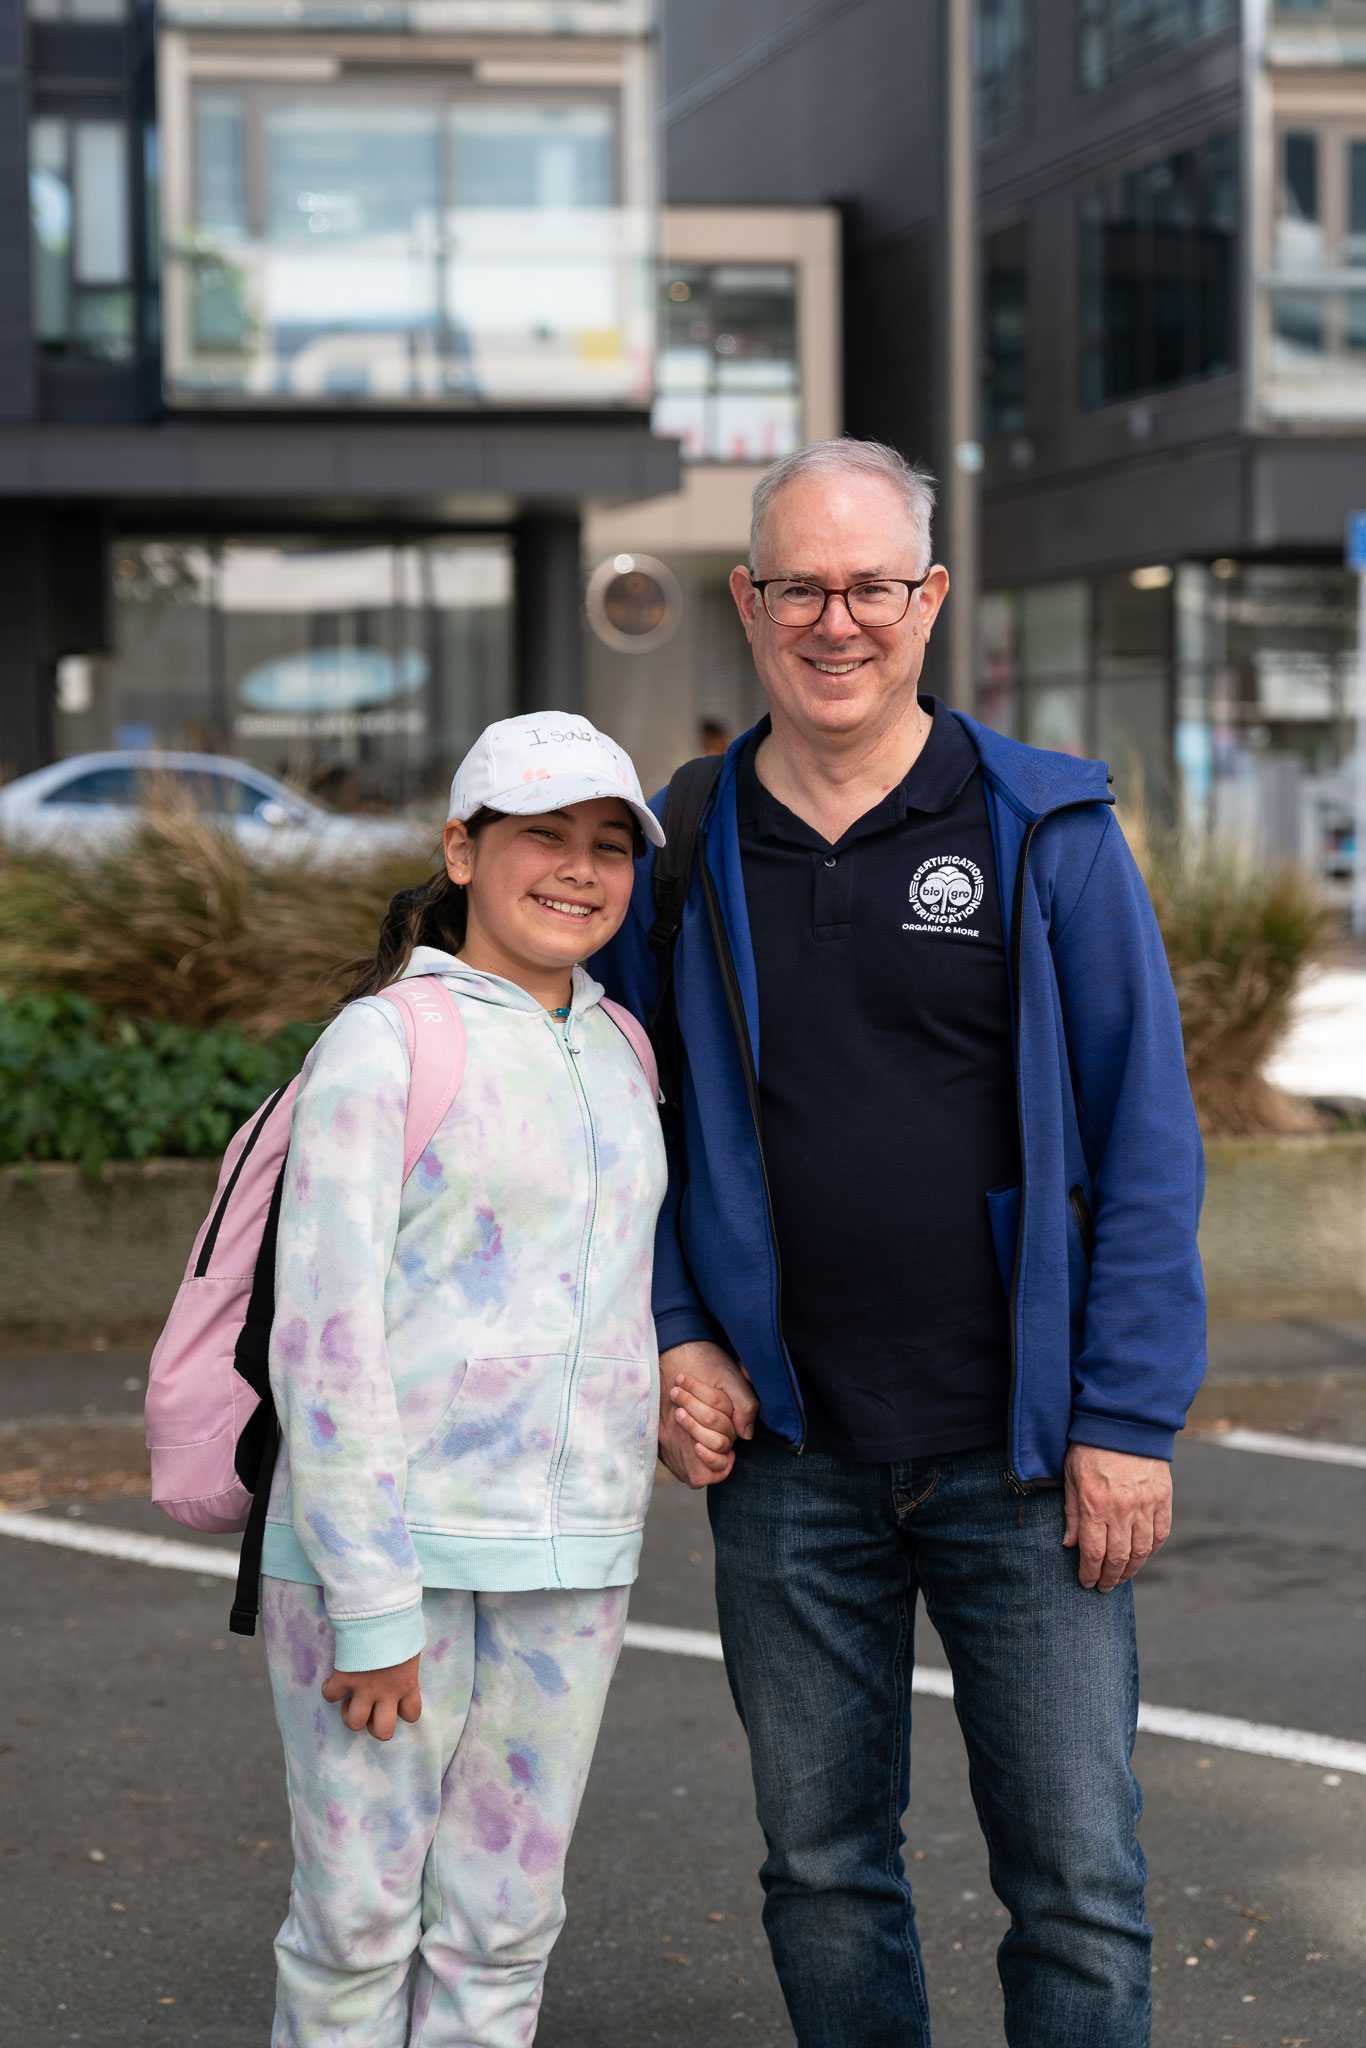 Donald and his daughter standing on the street in Wellington.